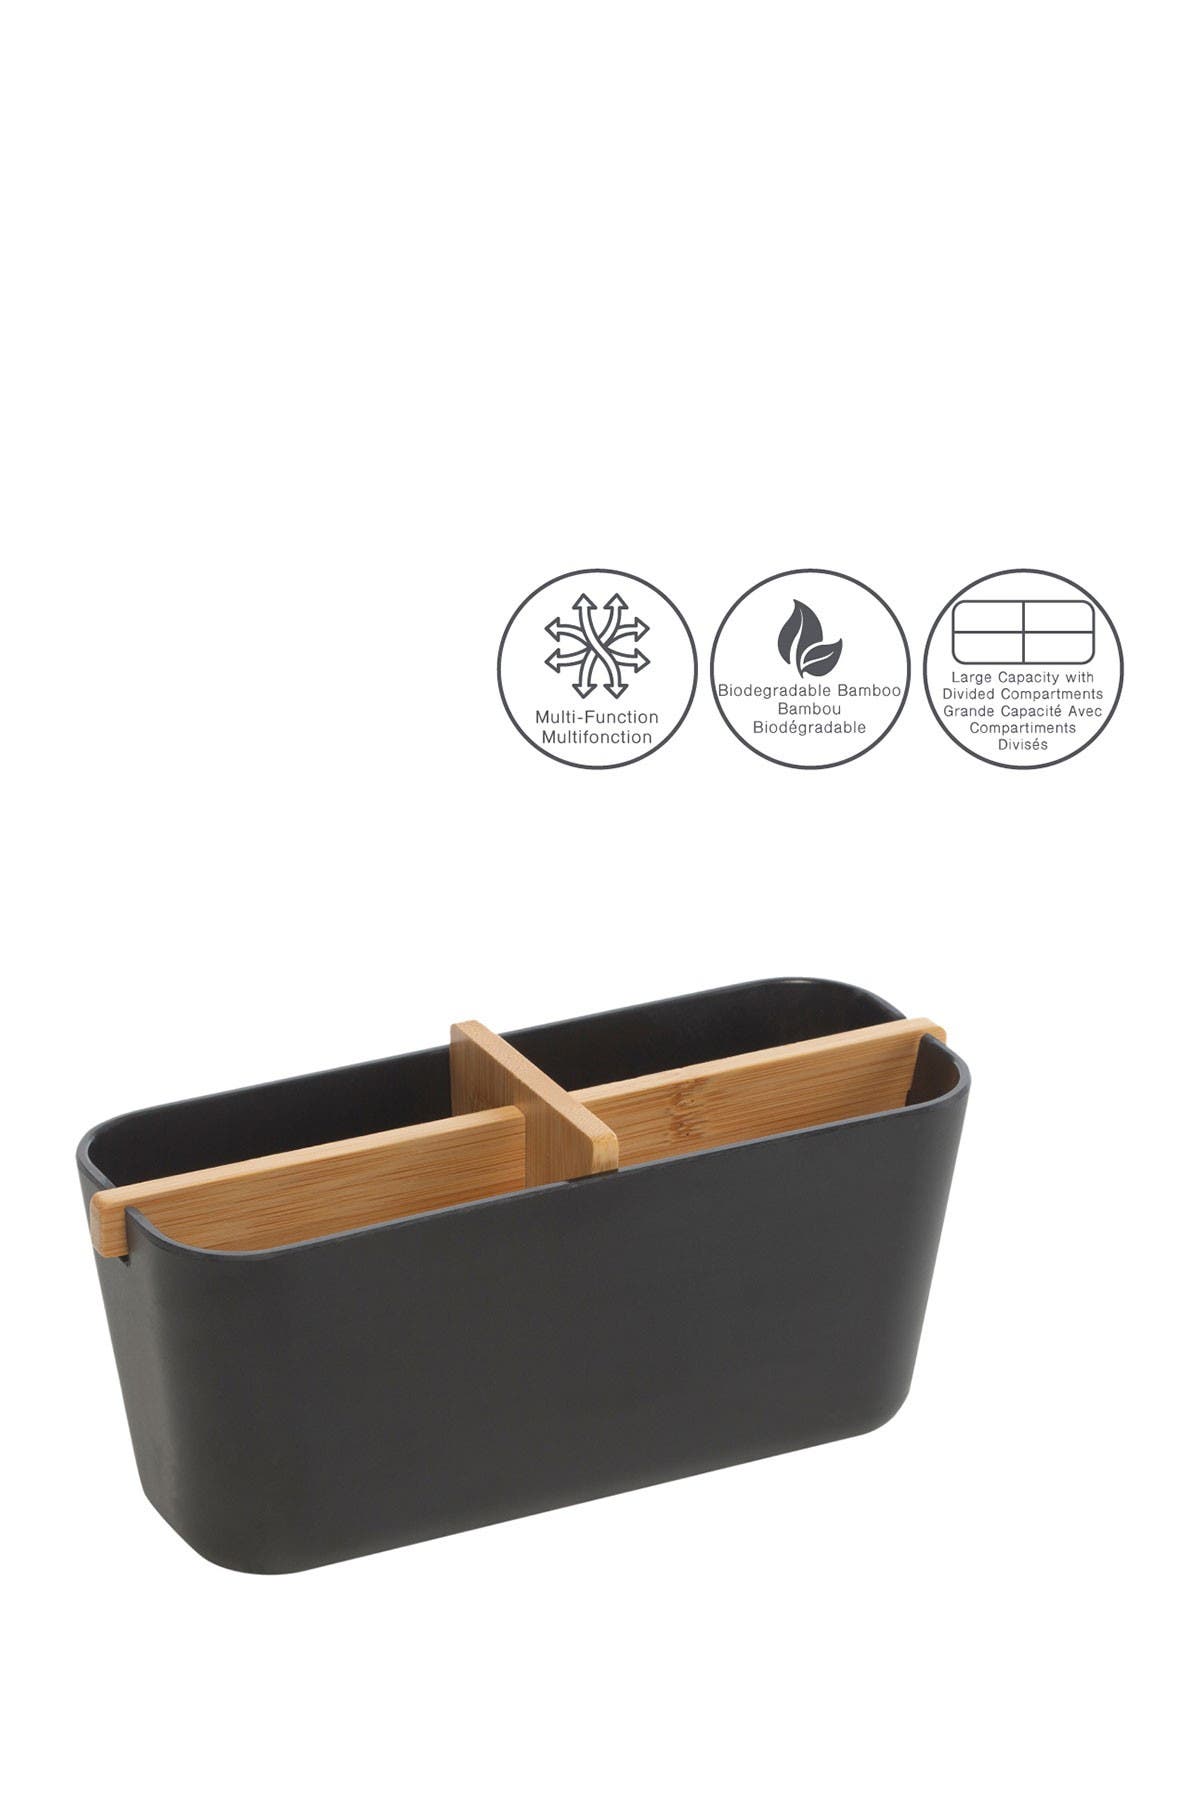 Moda At Home Multifunctional Bamboo Storage Container Nordstrom Rack